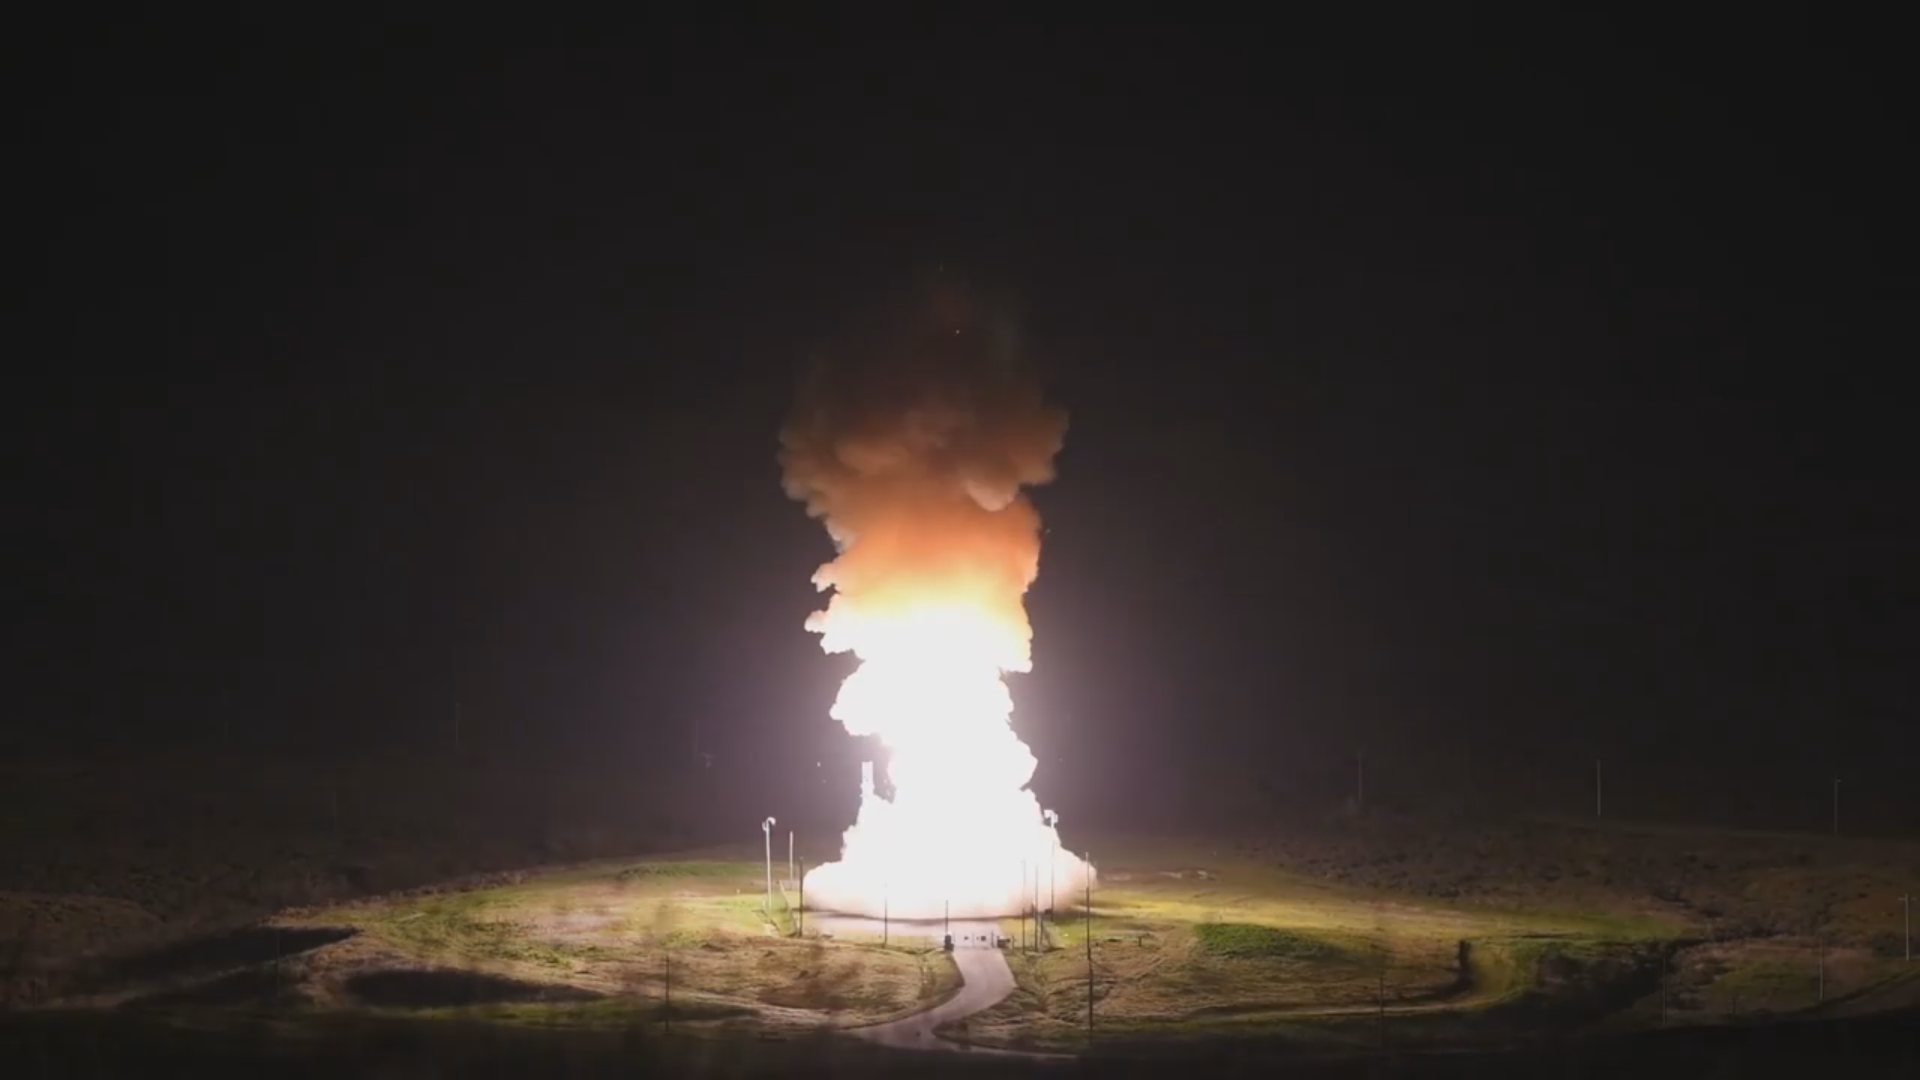 US Air Force shows rare video of Minuteman III intercontinental ballistic missile launch